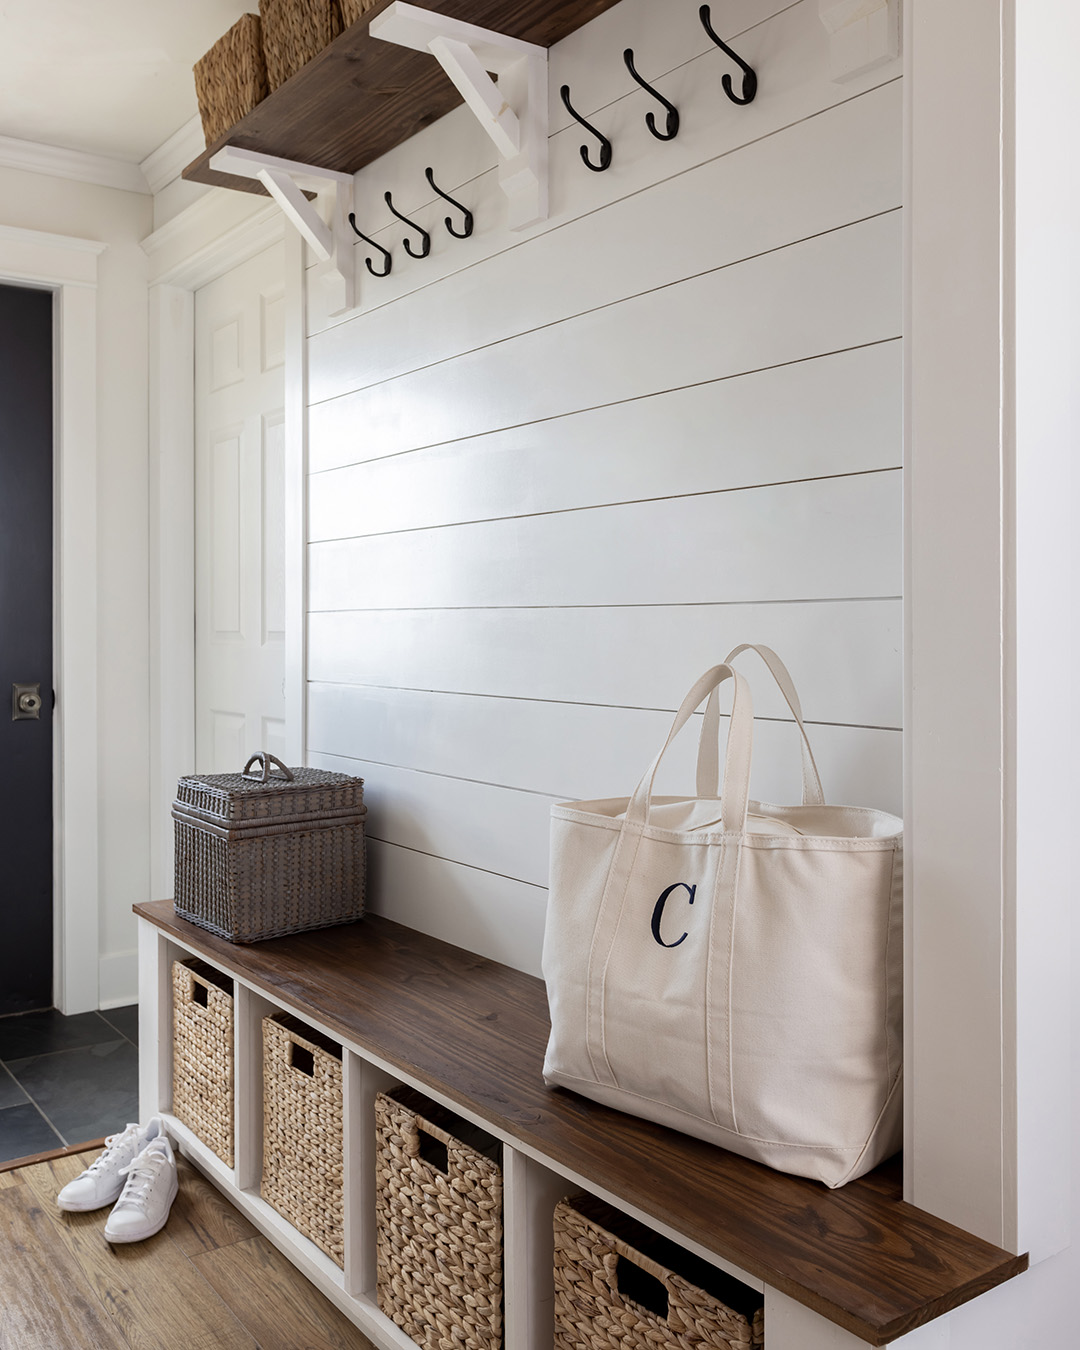 A compact mudroom area with hooks, cubbies, and baskets.